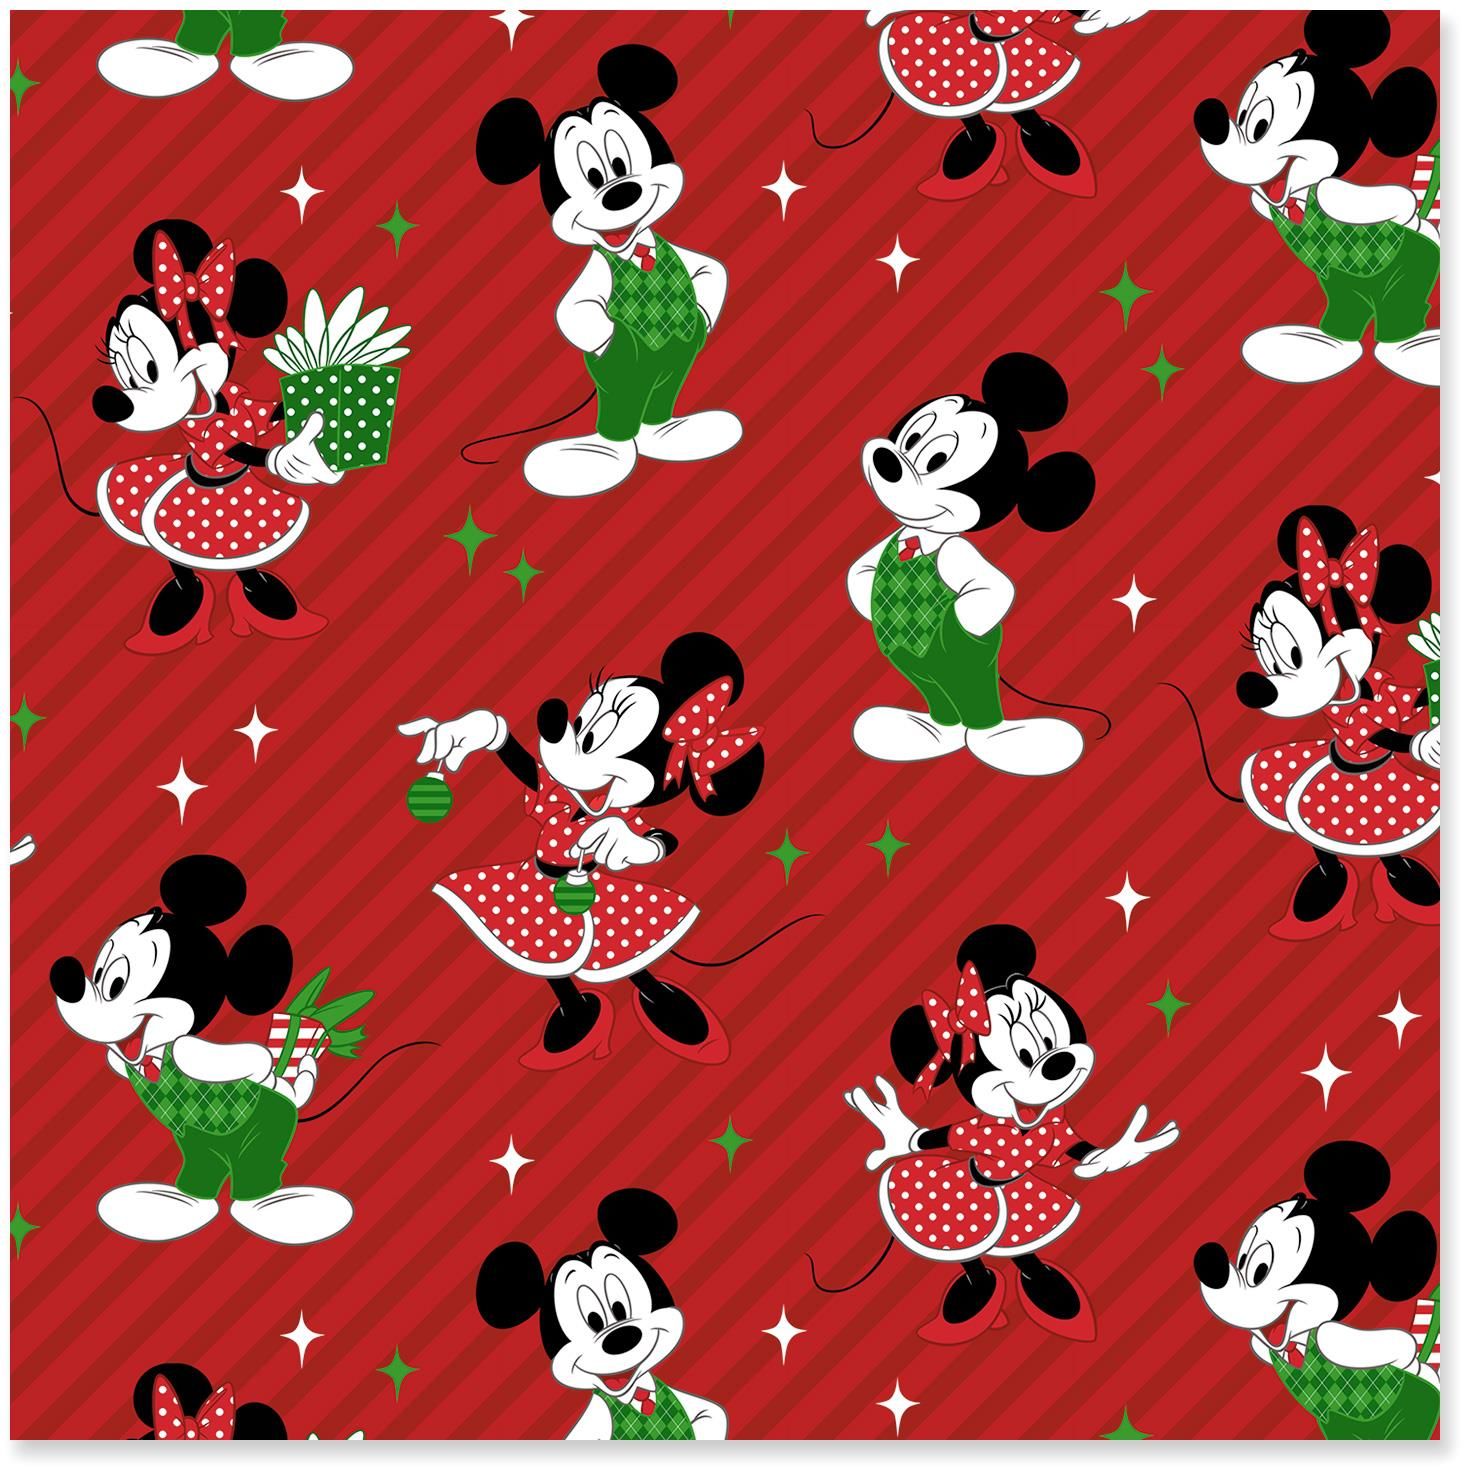 Disney Mickey and Minnie Jumbo Christmas Wrapping Paper Roll, 80 sq ...